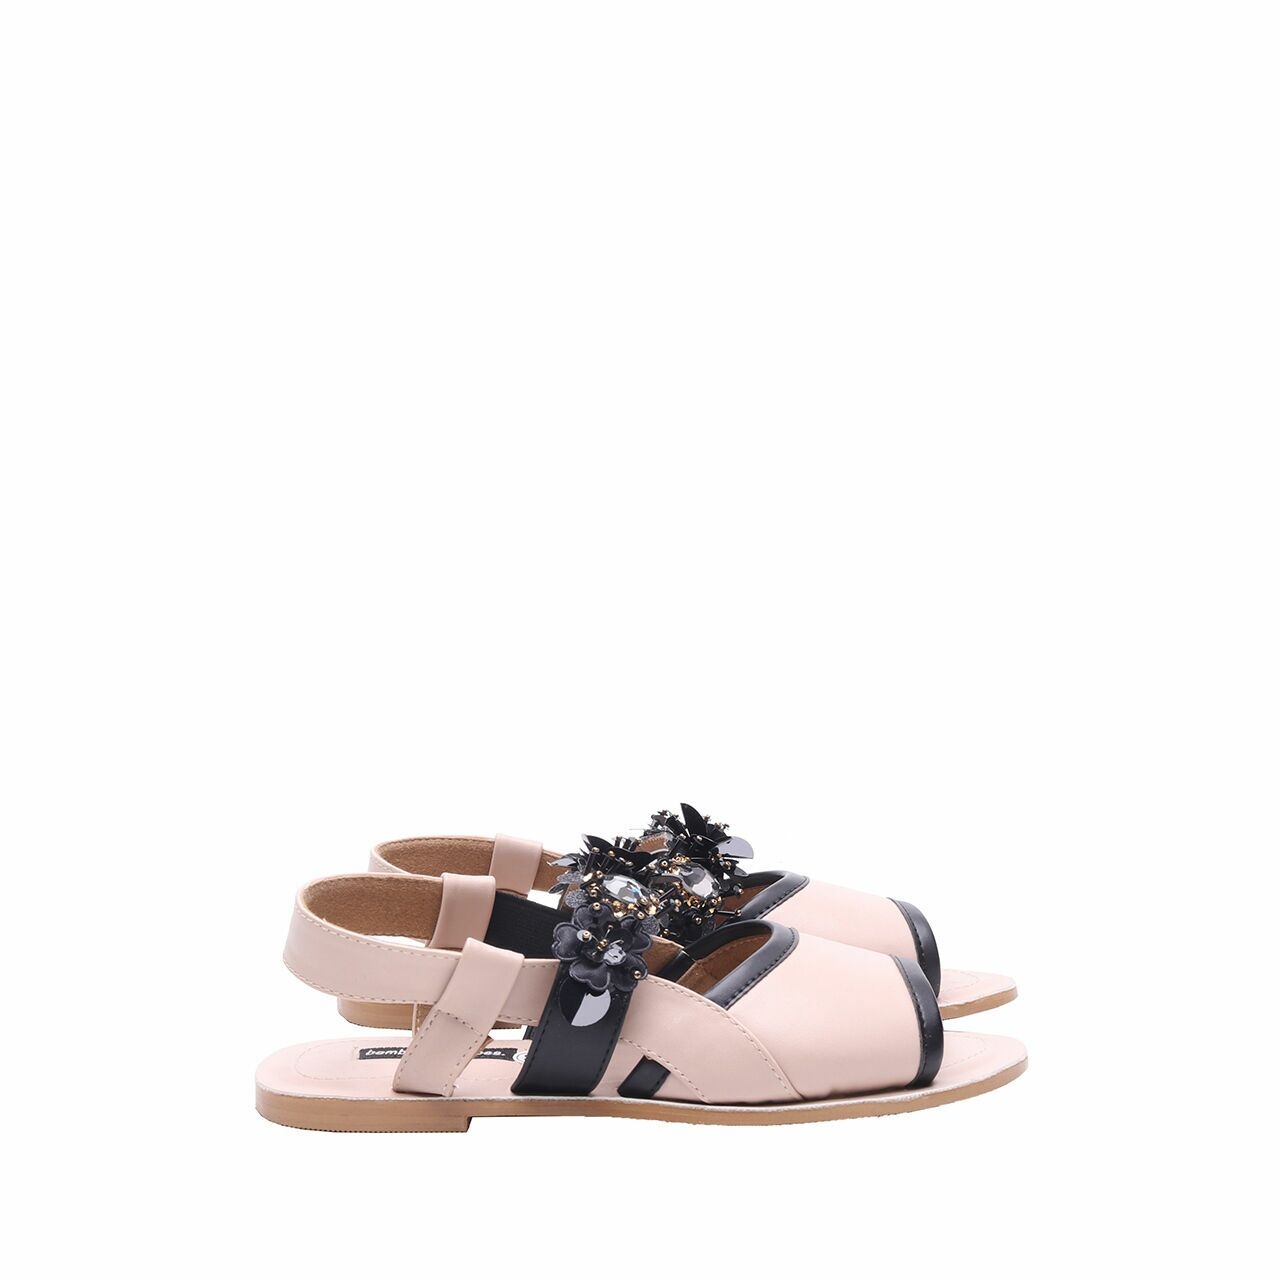 Bembibloopshoes Nude Sandals